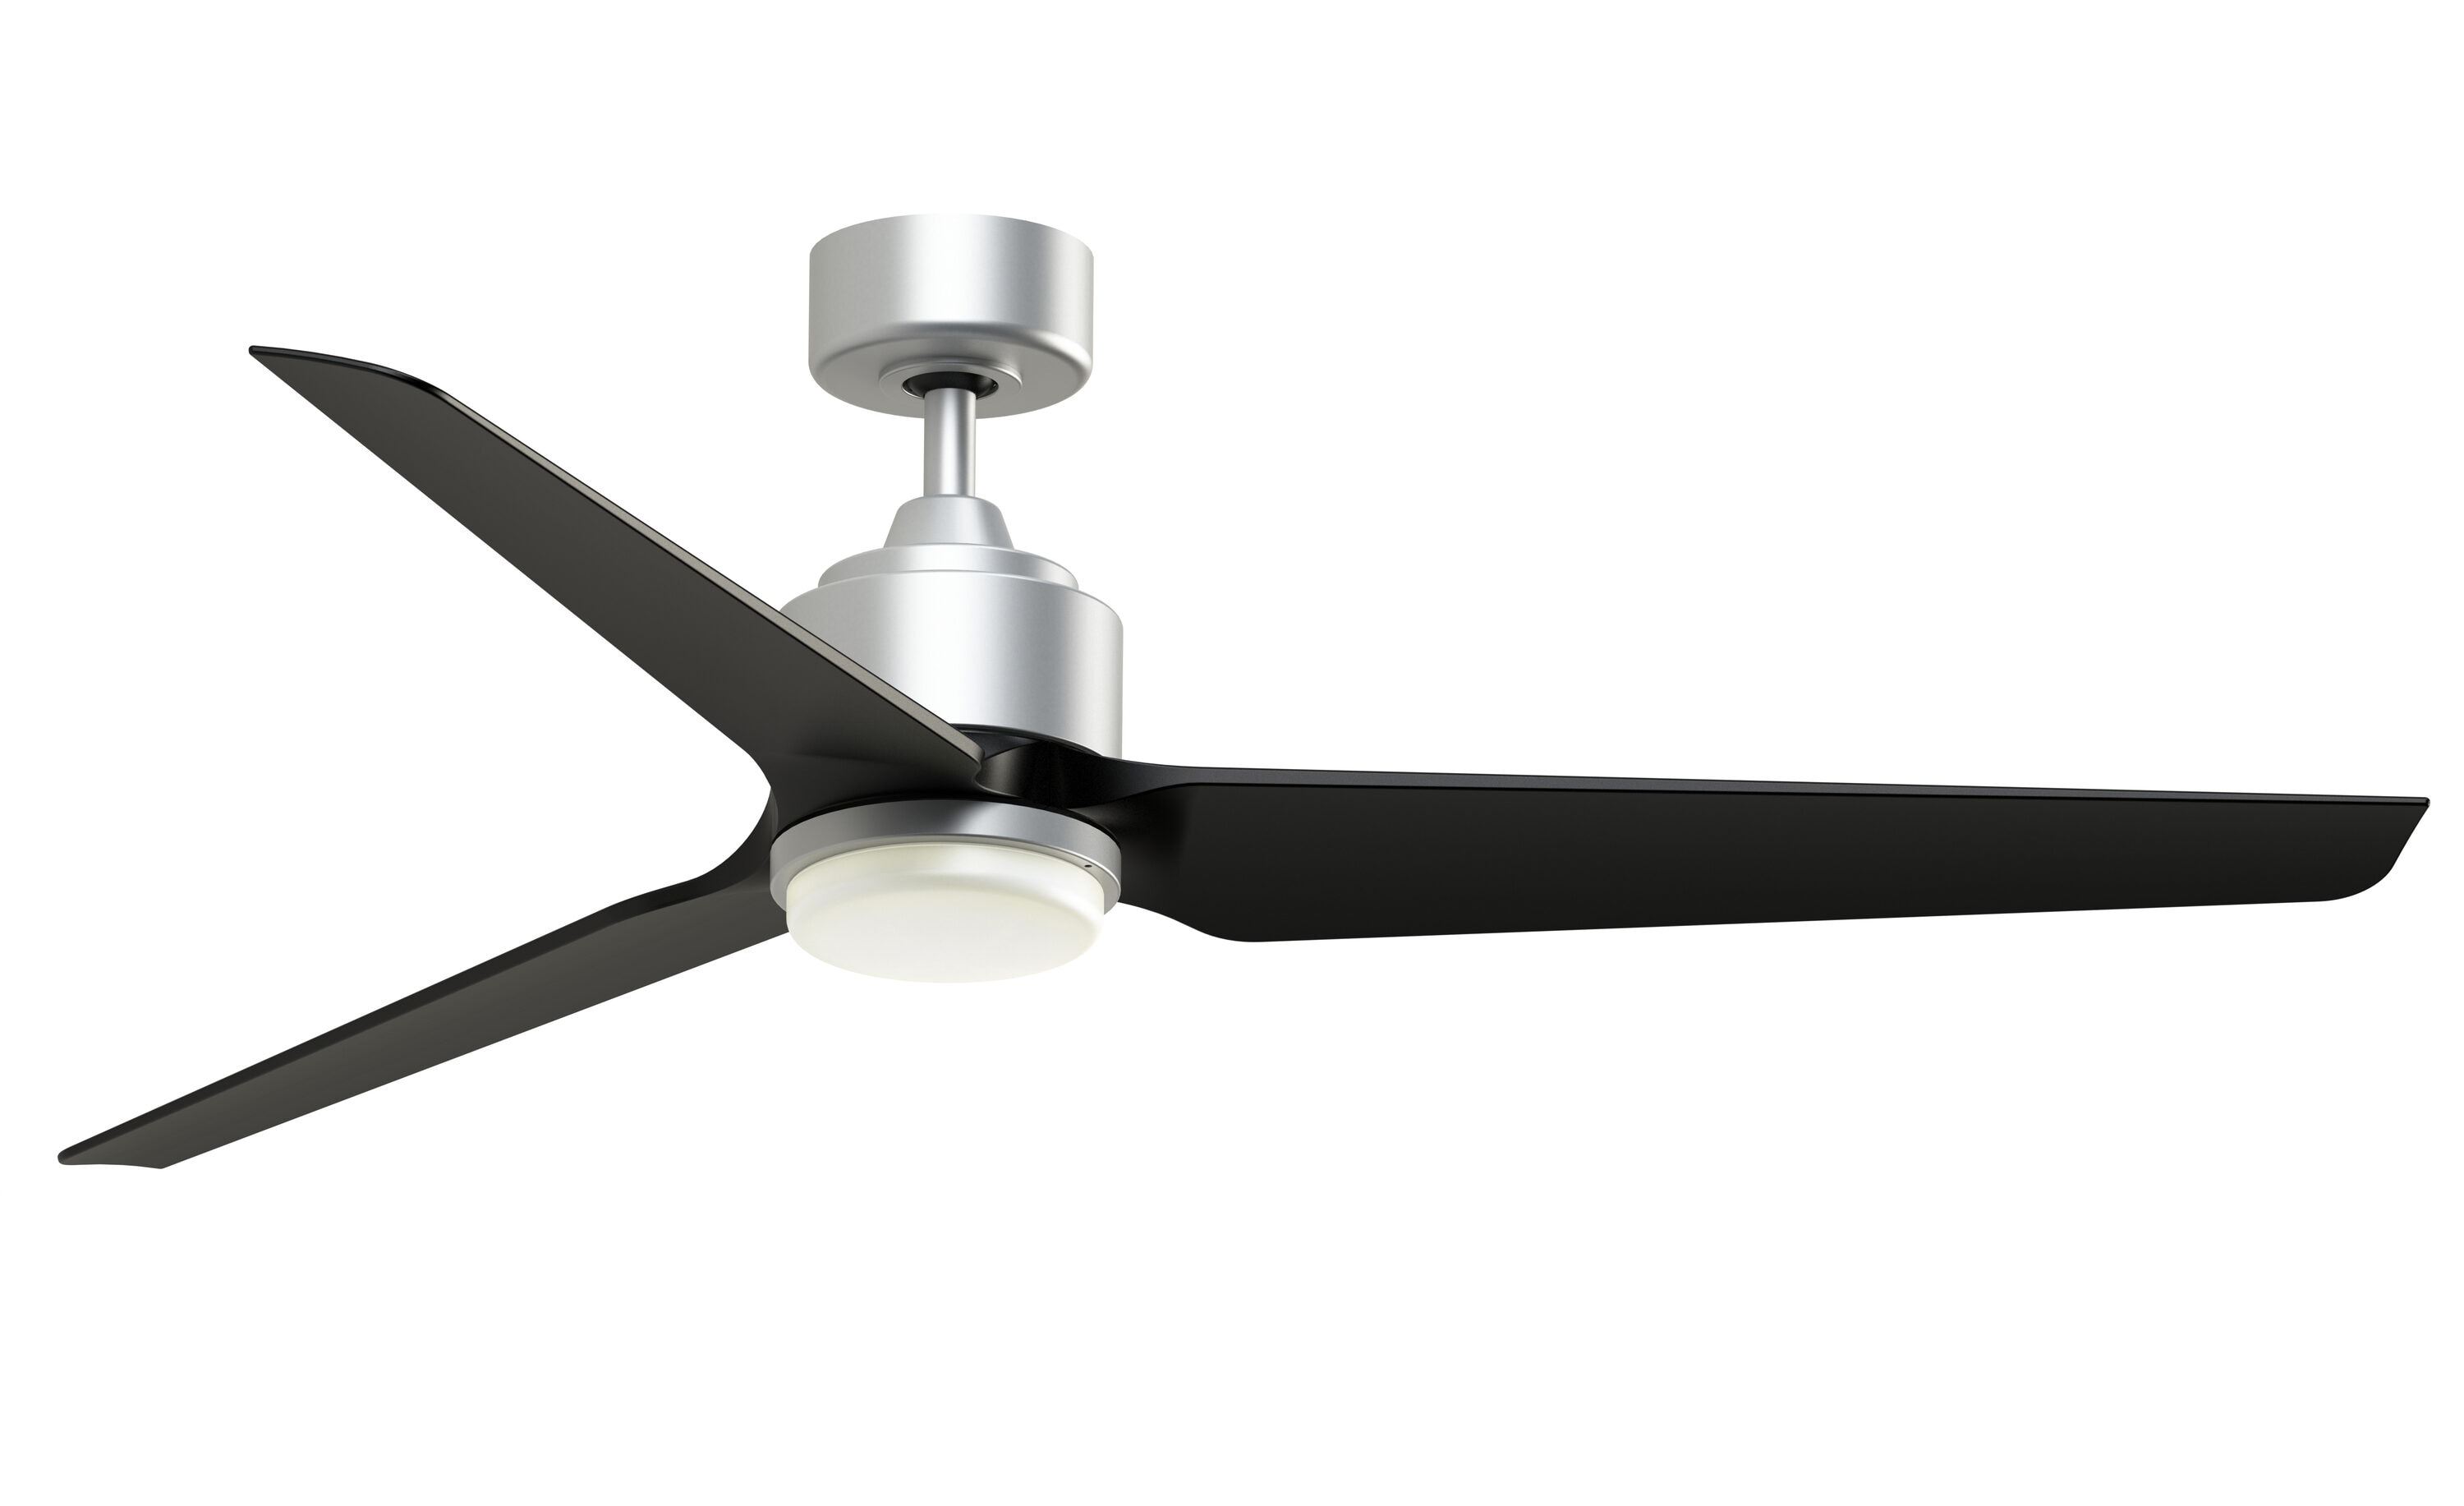 TriAire Custom 60-in Silver Color-changing LED Indoor/Outdoor Smart Propeller Ceiling Fan with Light Remote (3-Blade) | - Fanimation FPD8514SLW-60BLW-LK